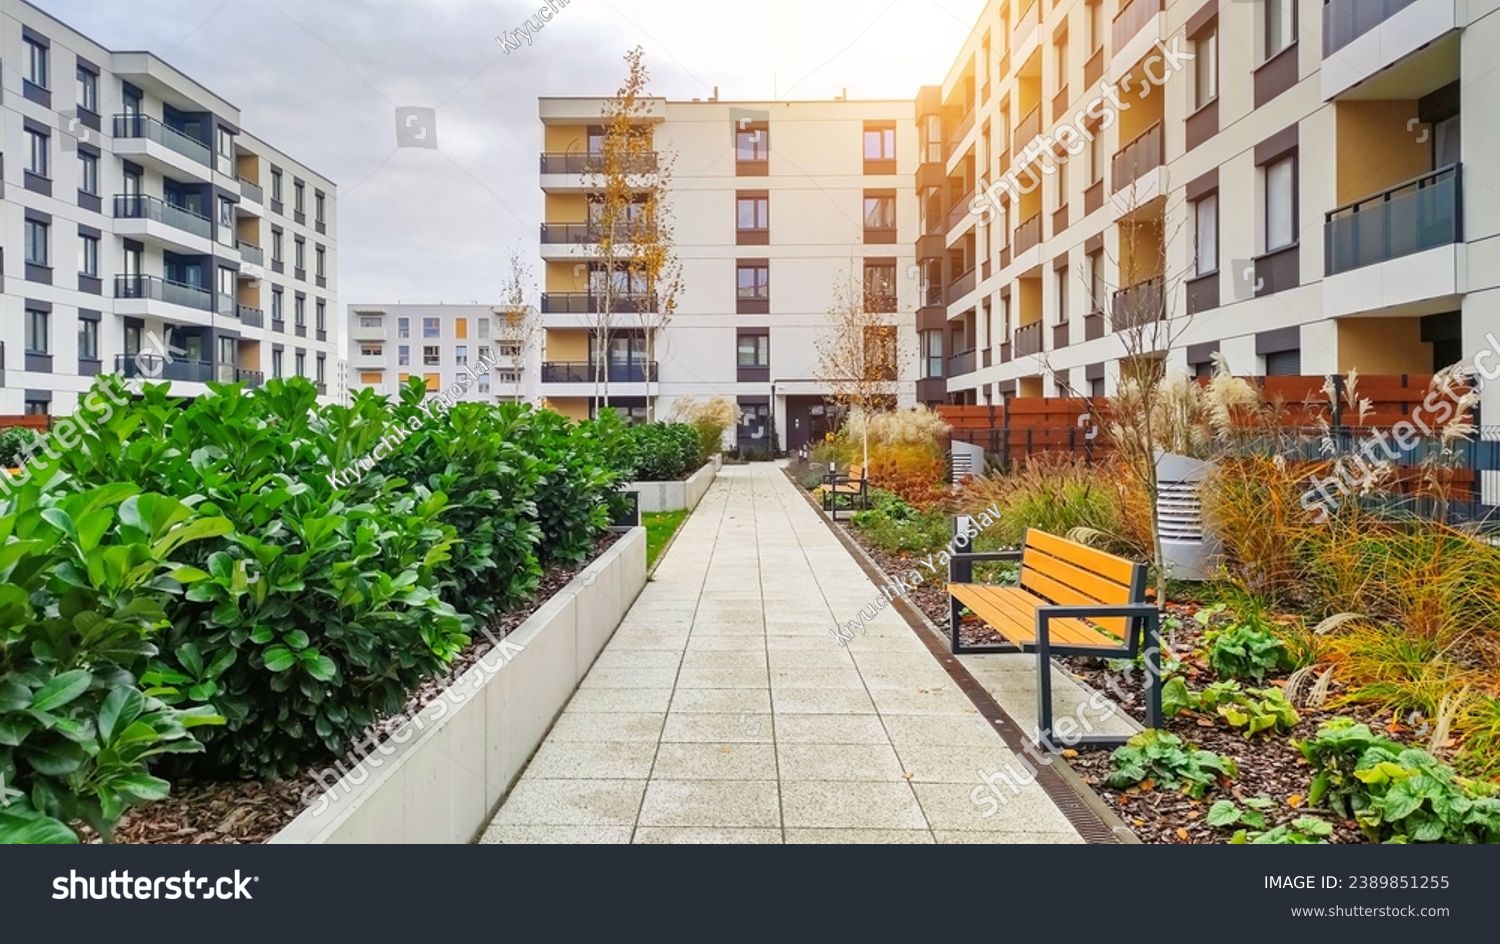 Courtyard in a residential building block of flats #2389851255